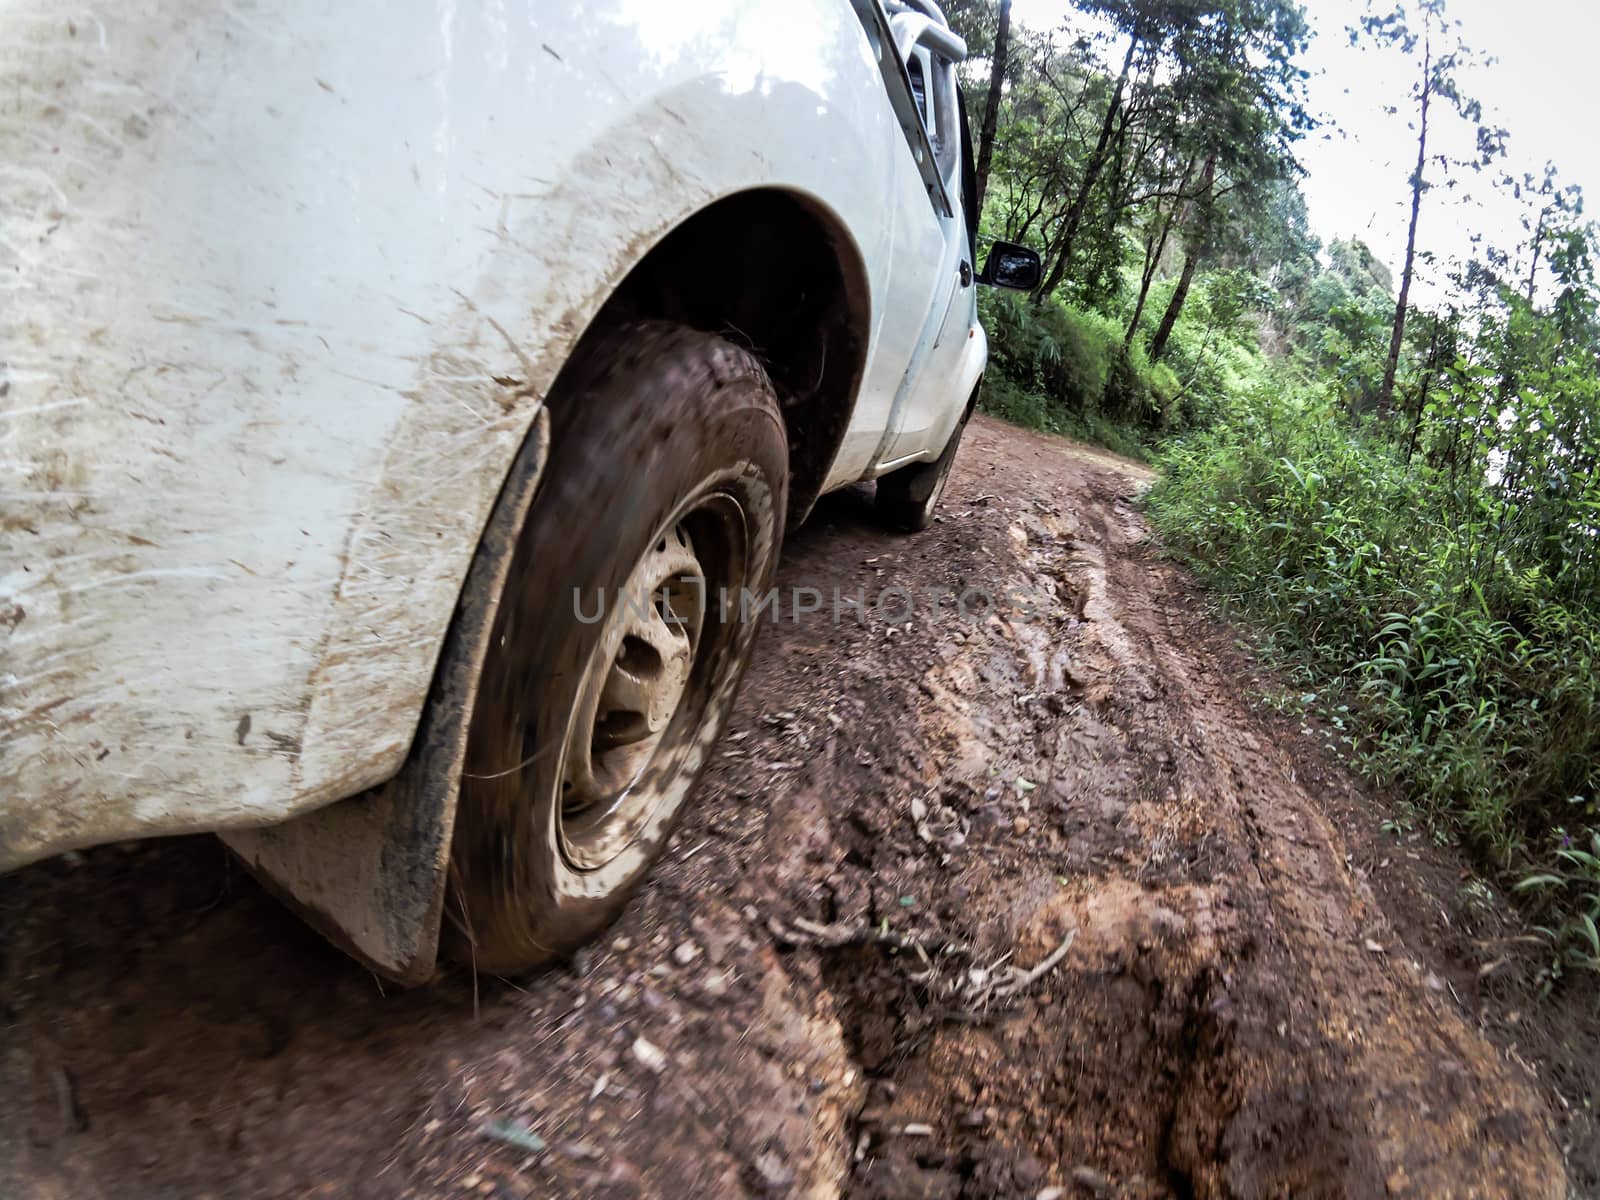 The car's wheels on the dirt road.